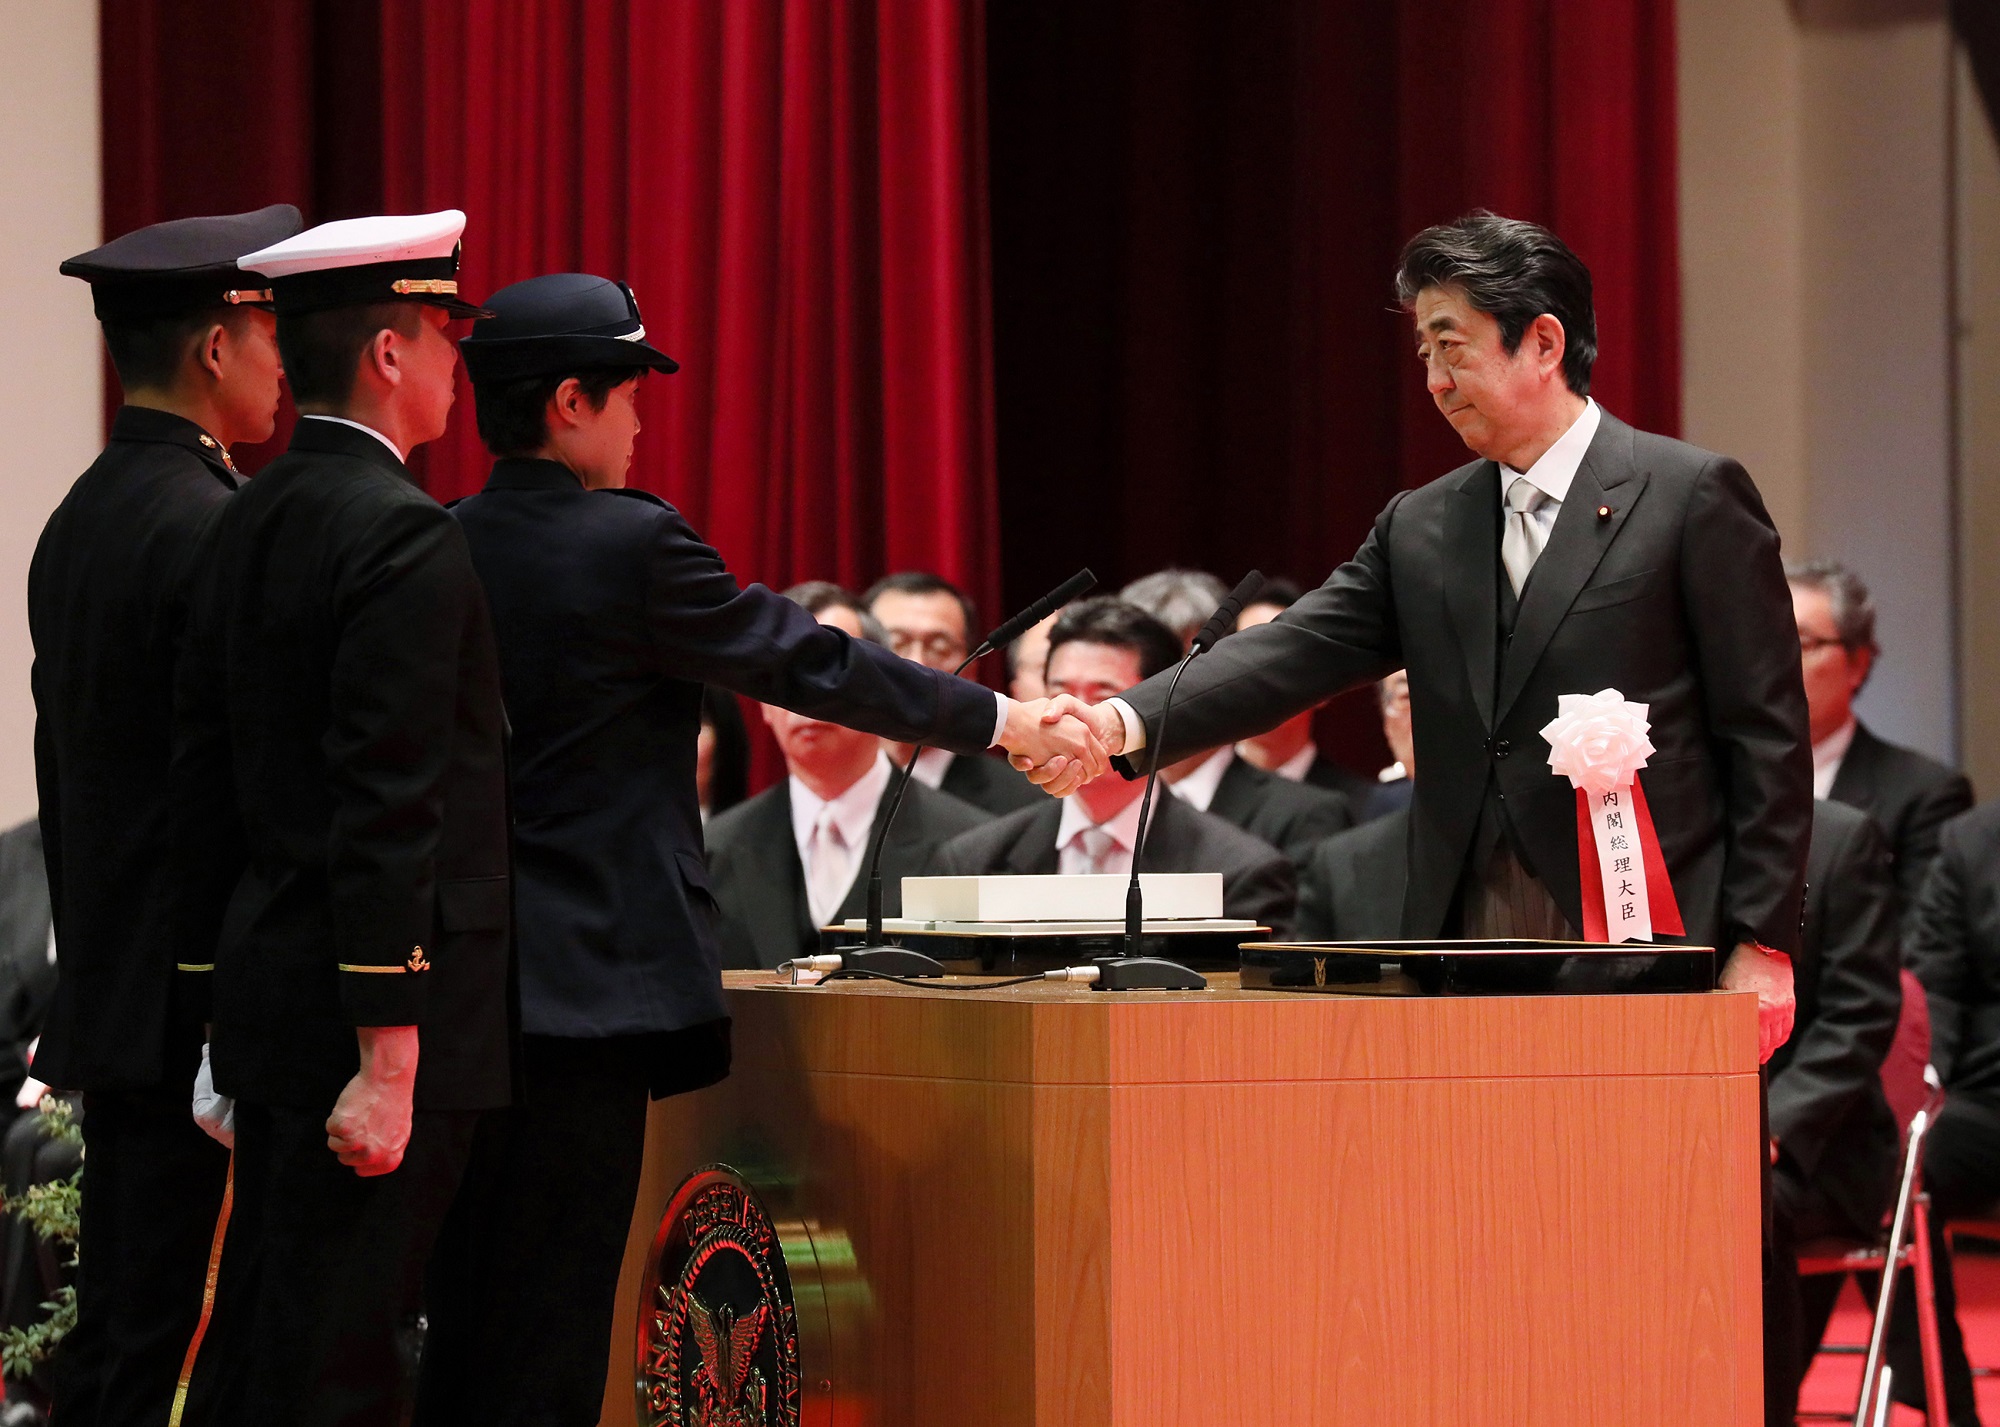 Photograph of the Prime Minister shaking hands during the oath of service ceremony